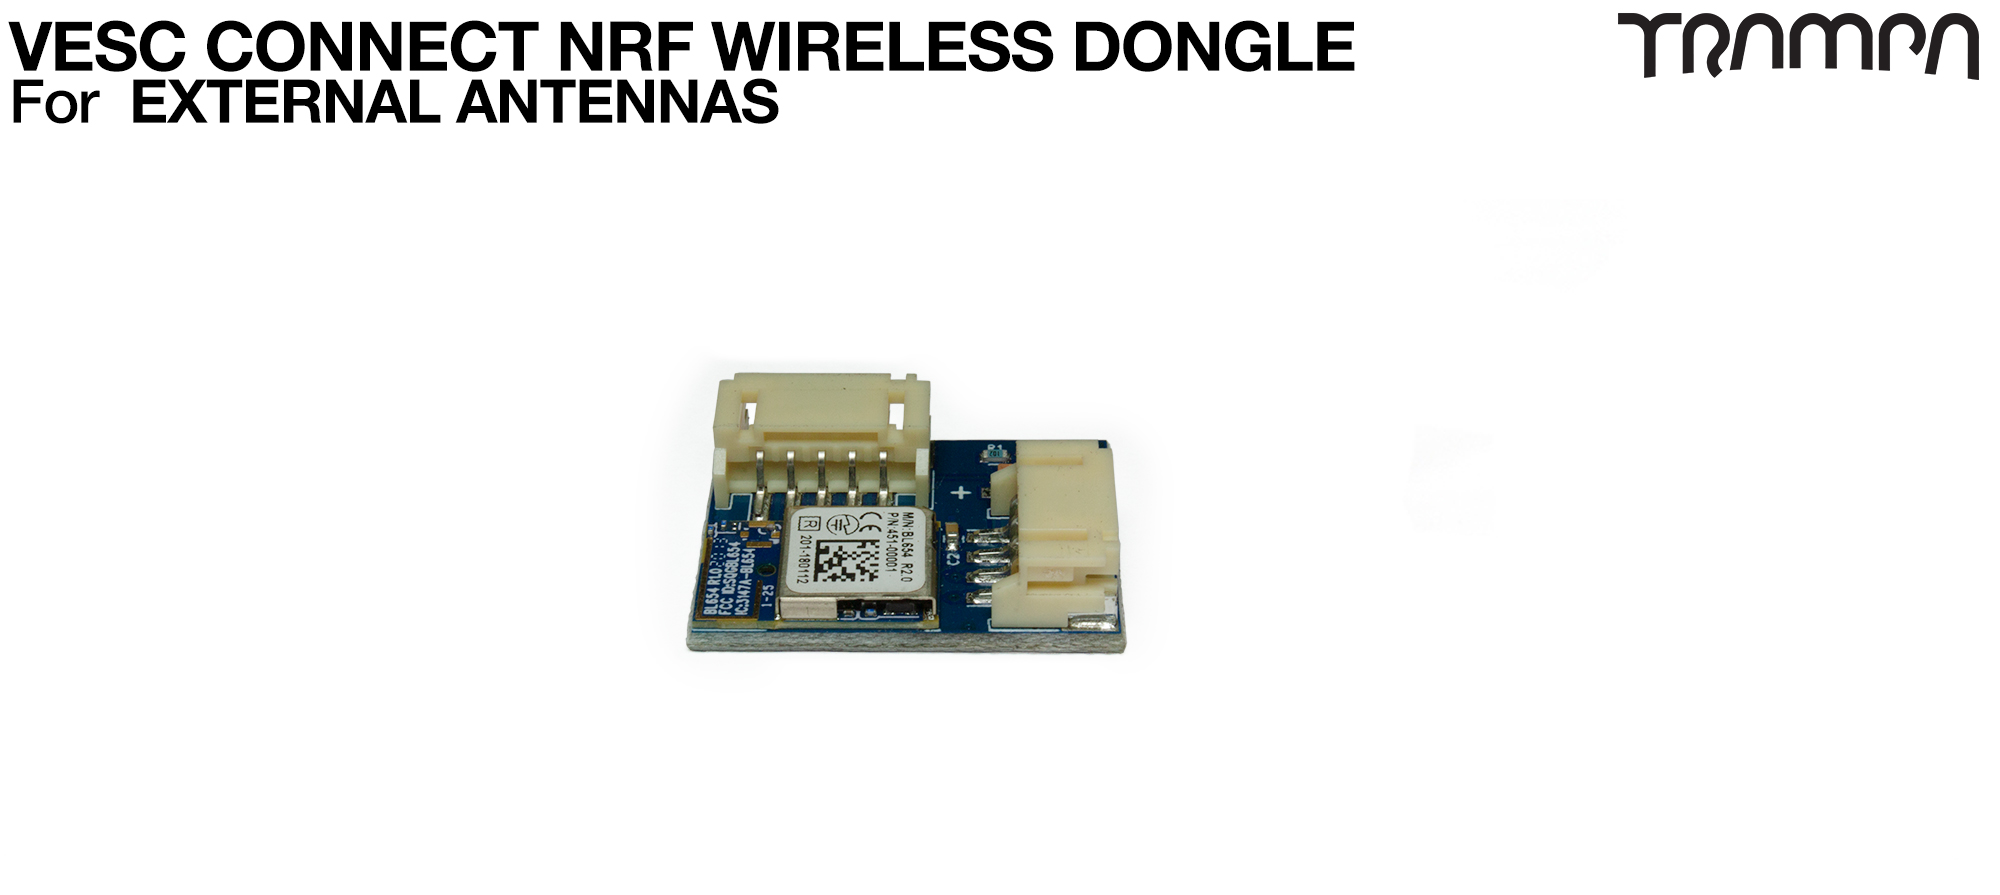 10x NRF Dongle with EXTERNAL PCB Antennas (+£250)